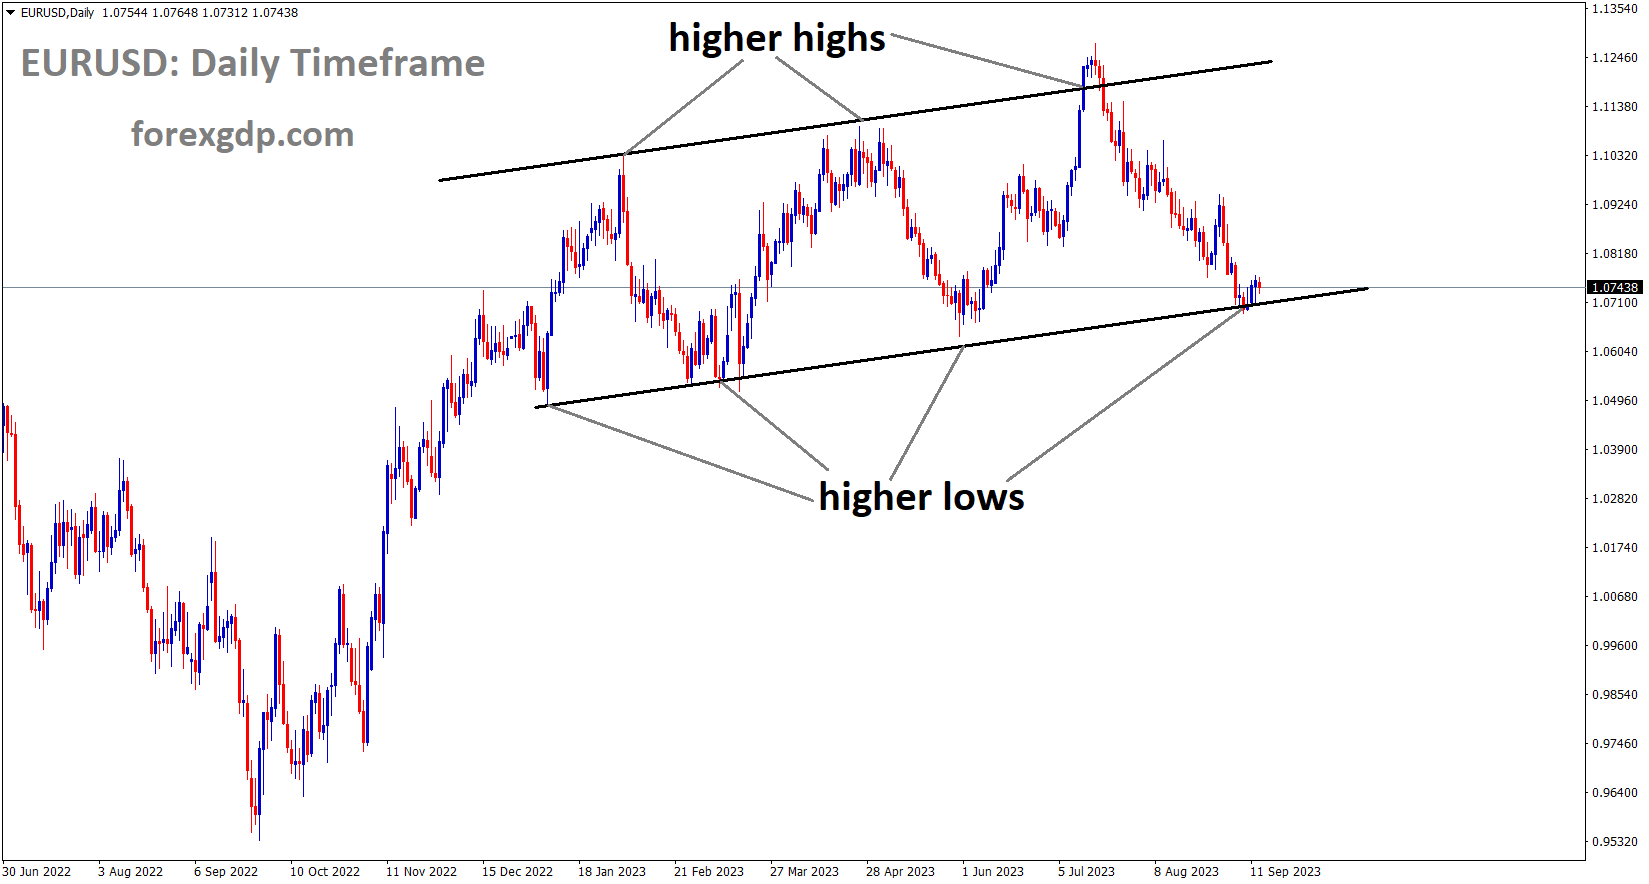 EURUSD is moving in Ascending channel and market has reached higher low area of the channel